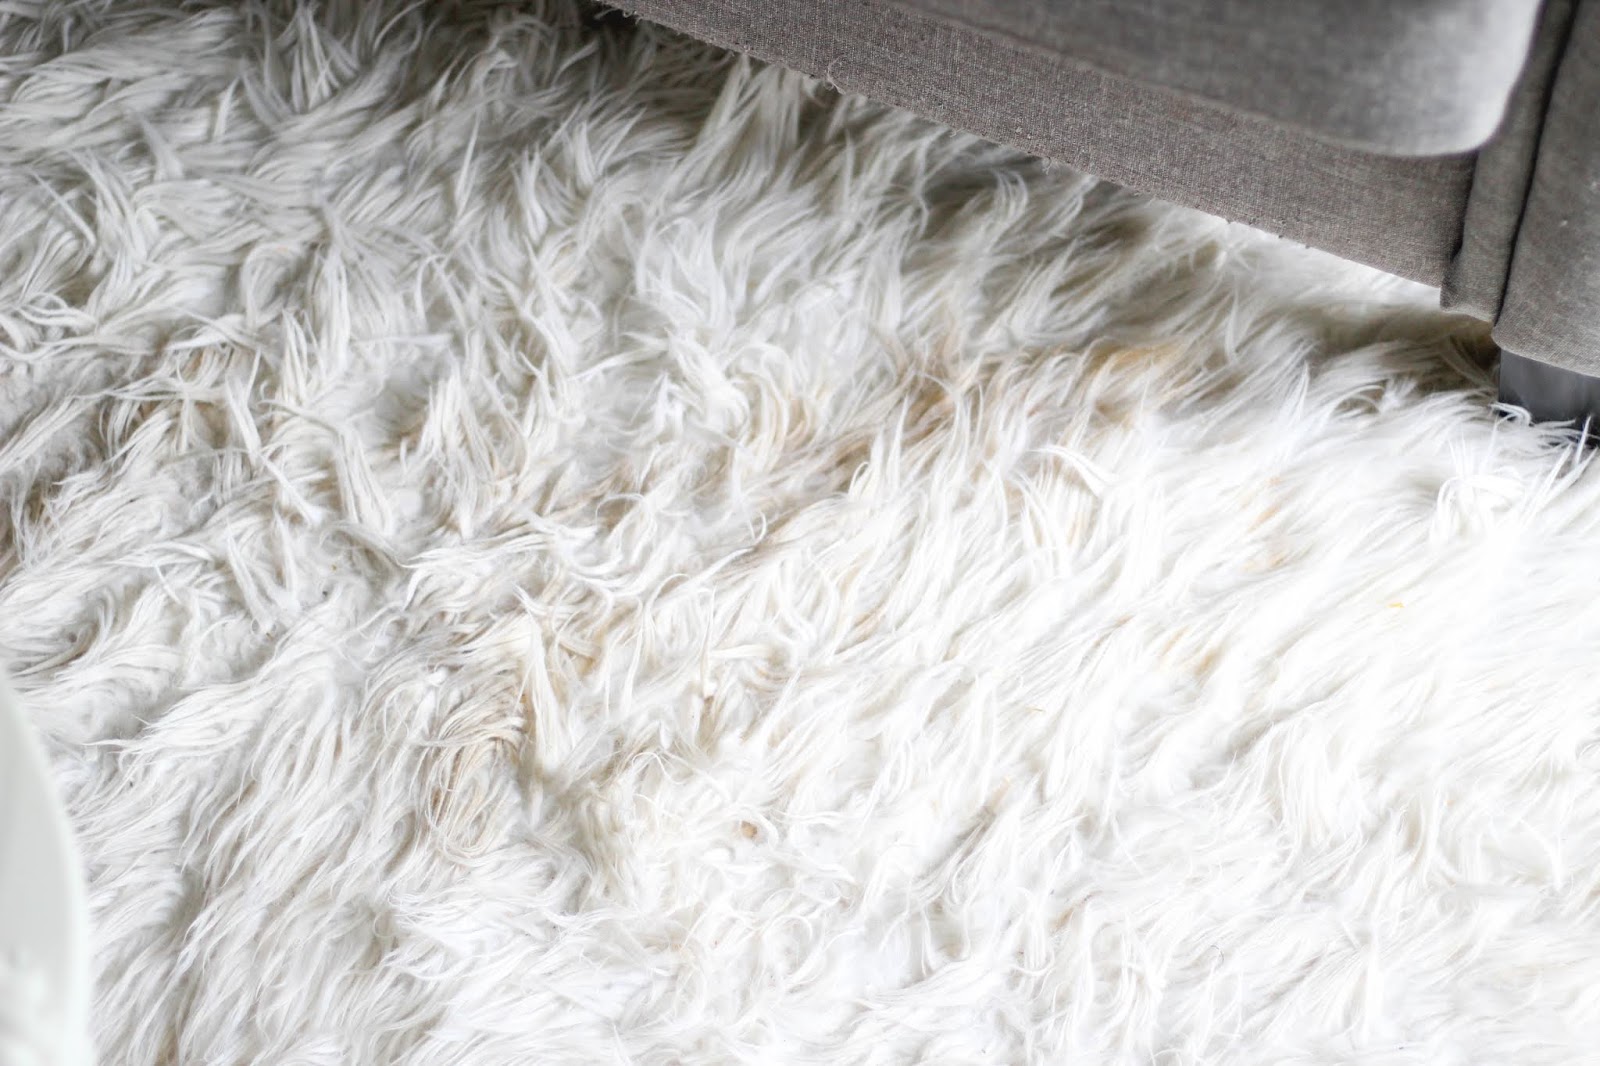 How to Wash and Care for Faux Fur Clothing